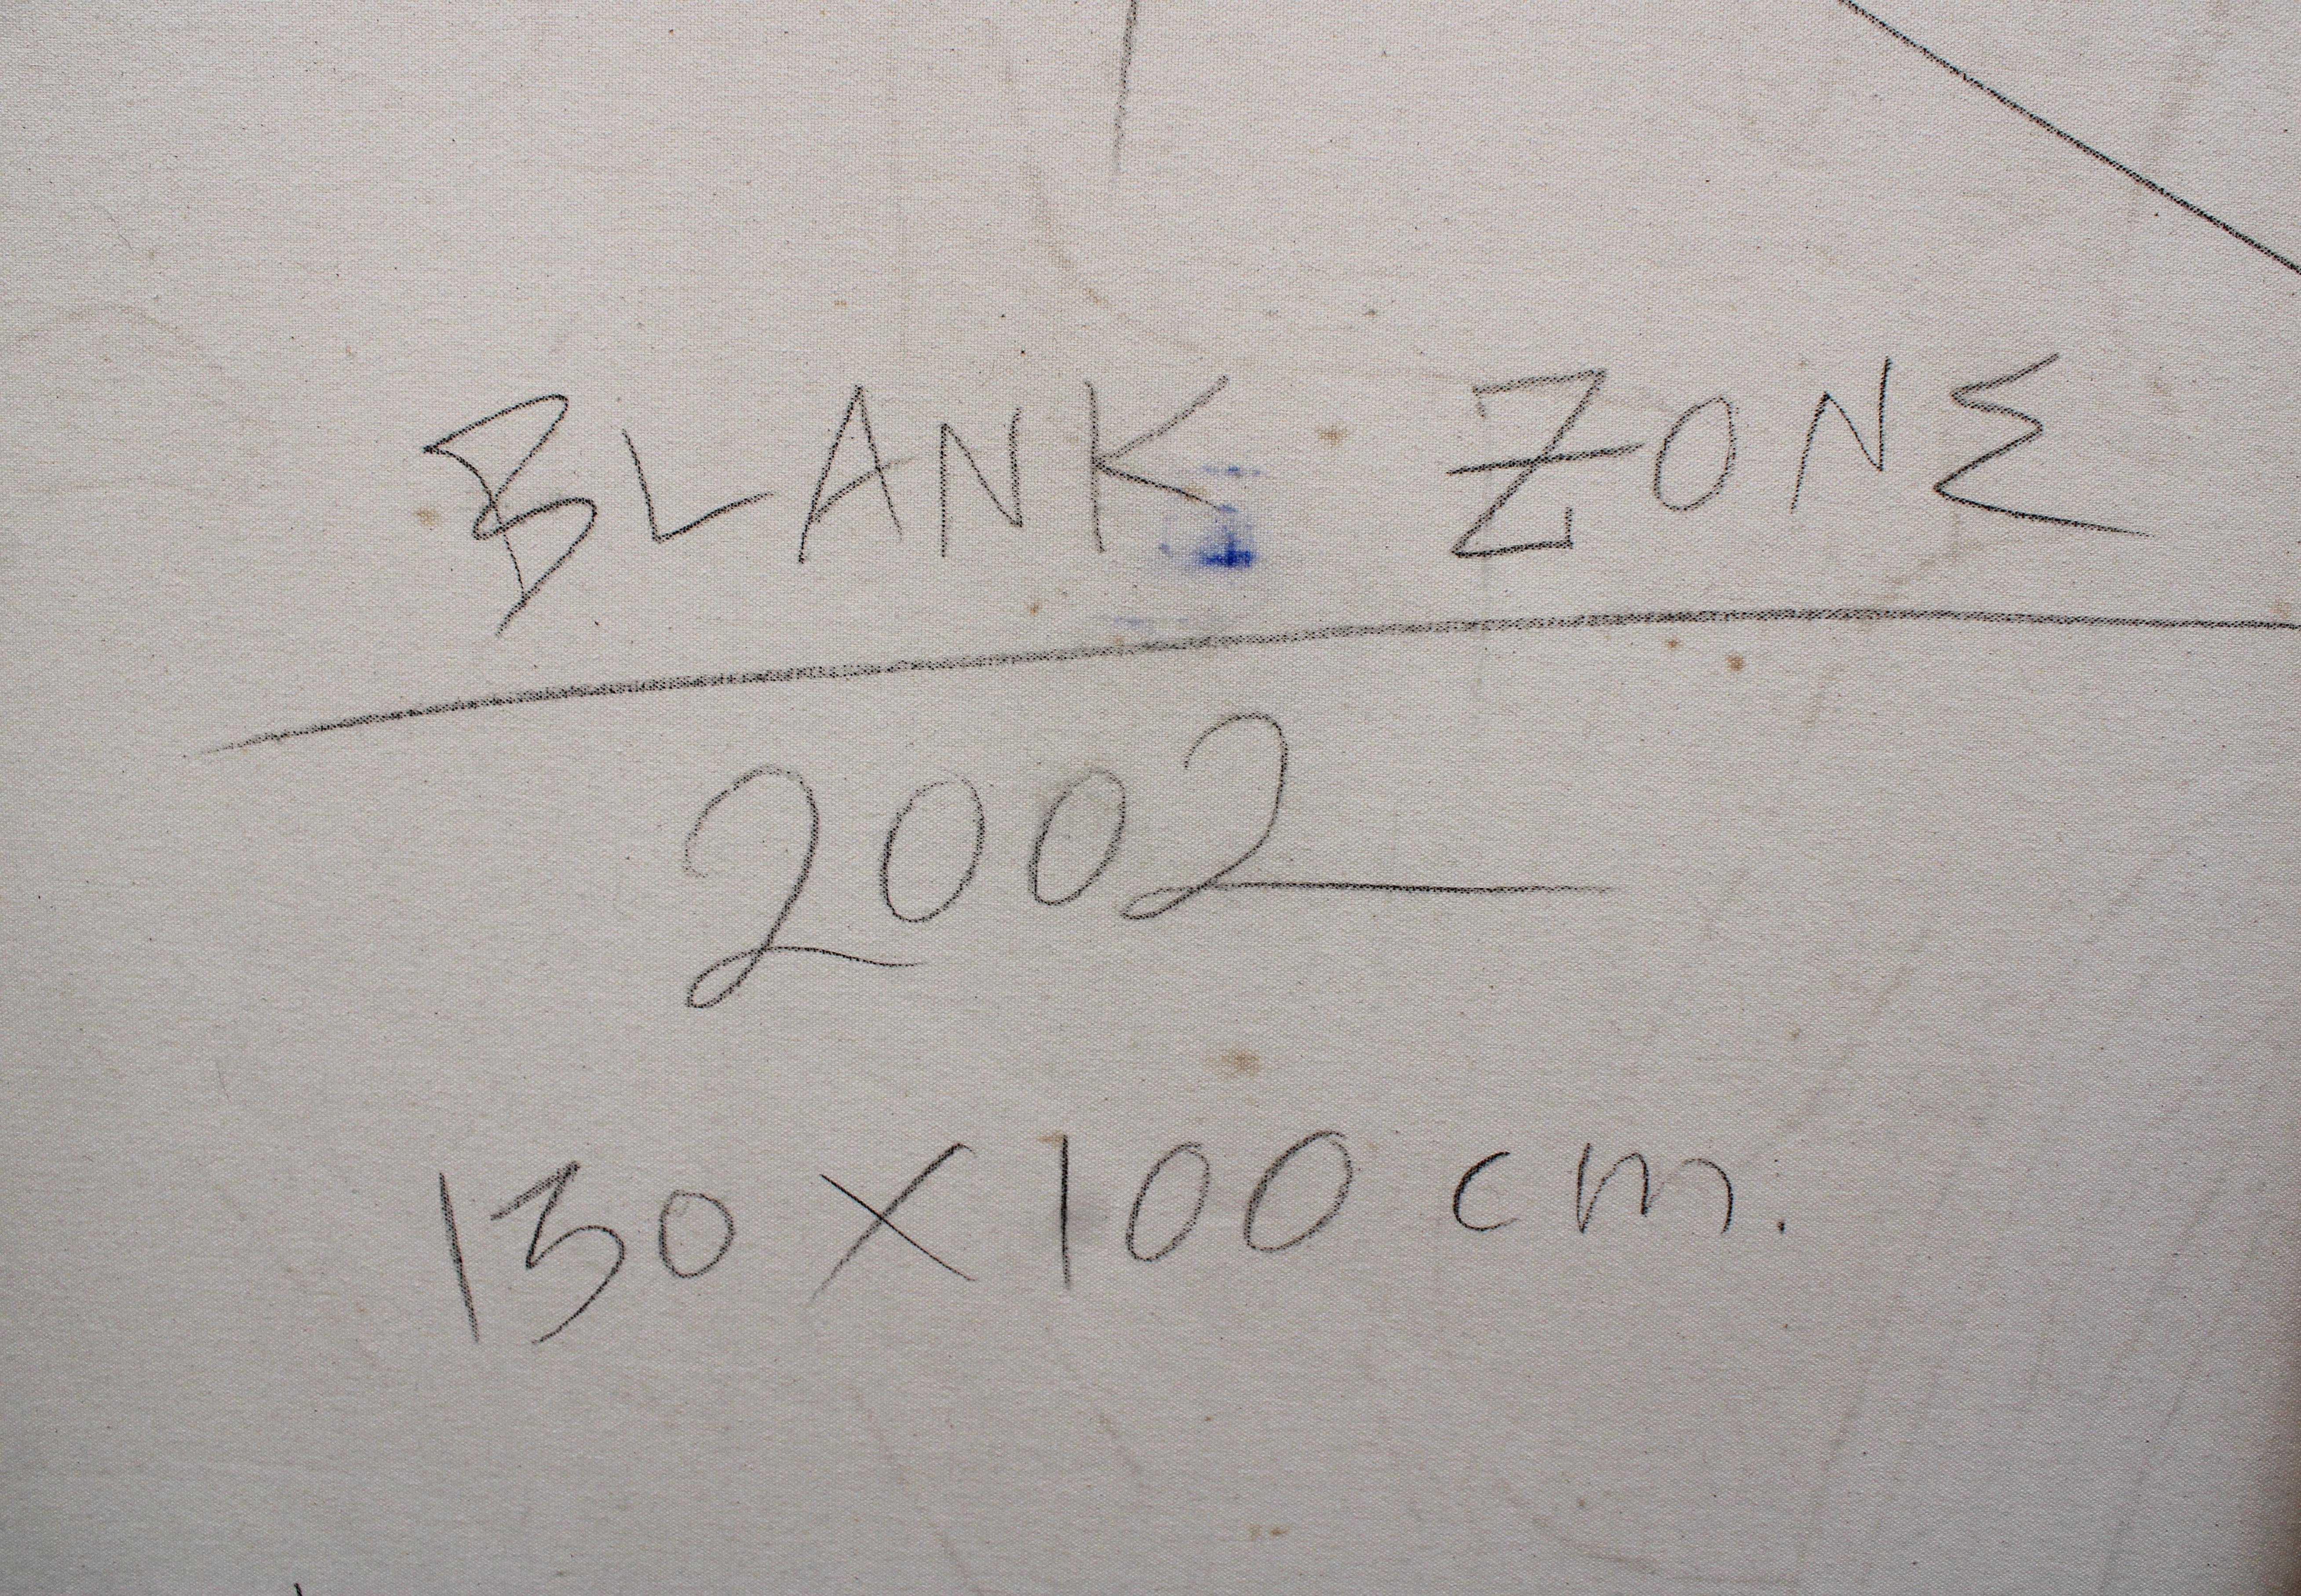 Blank Zone For Sale 7